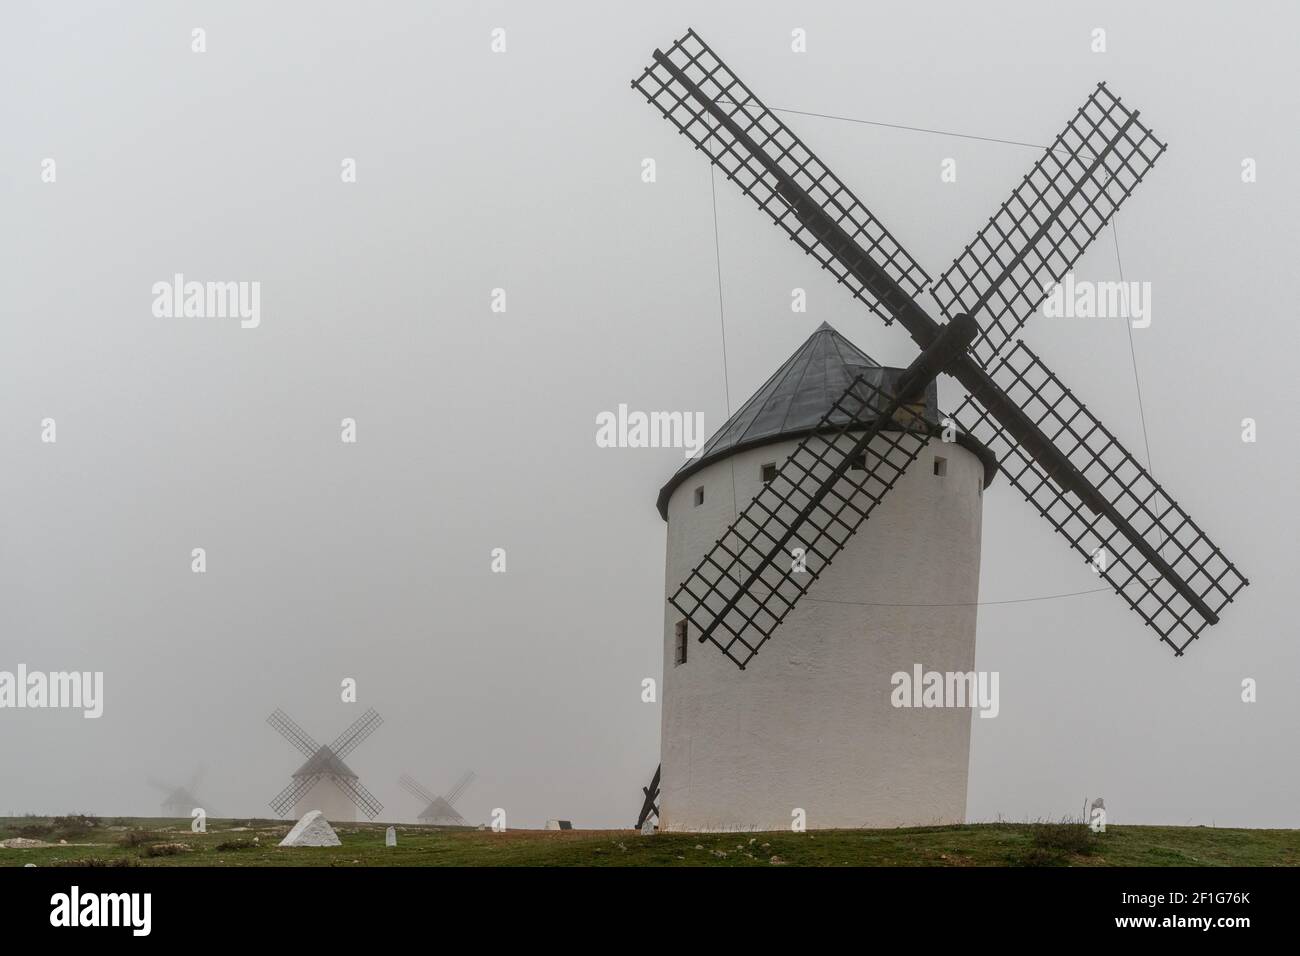 A view of the windmills of Campo de Criptana in La Mancha on a very foggy morning Stock Photo